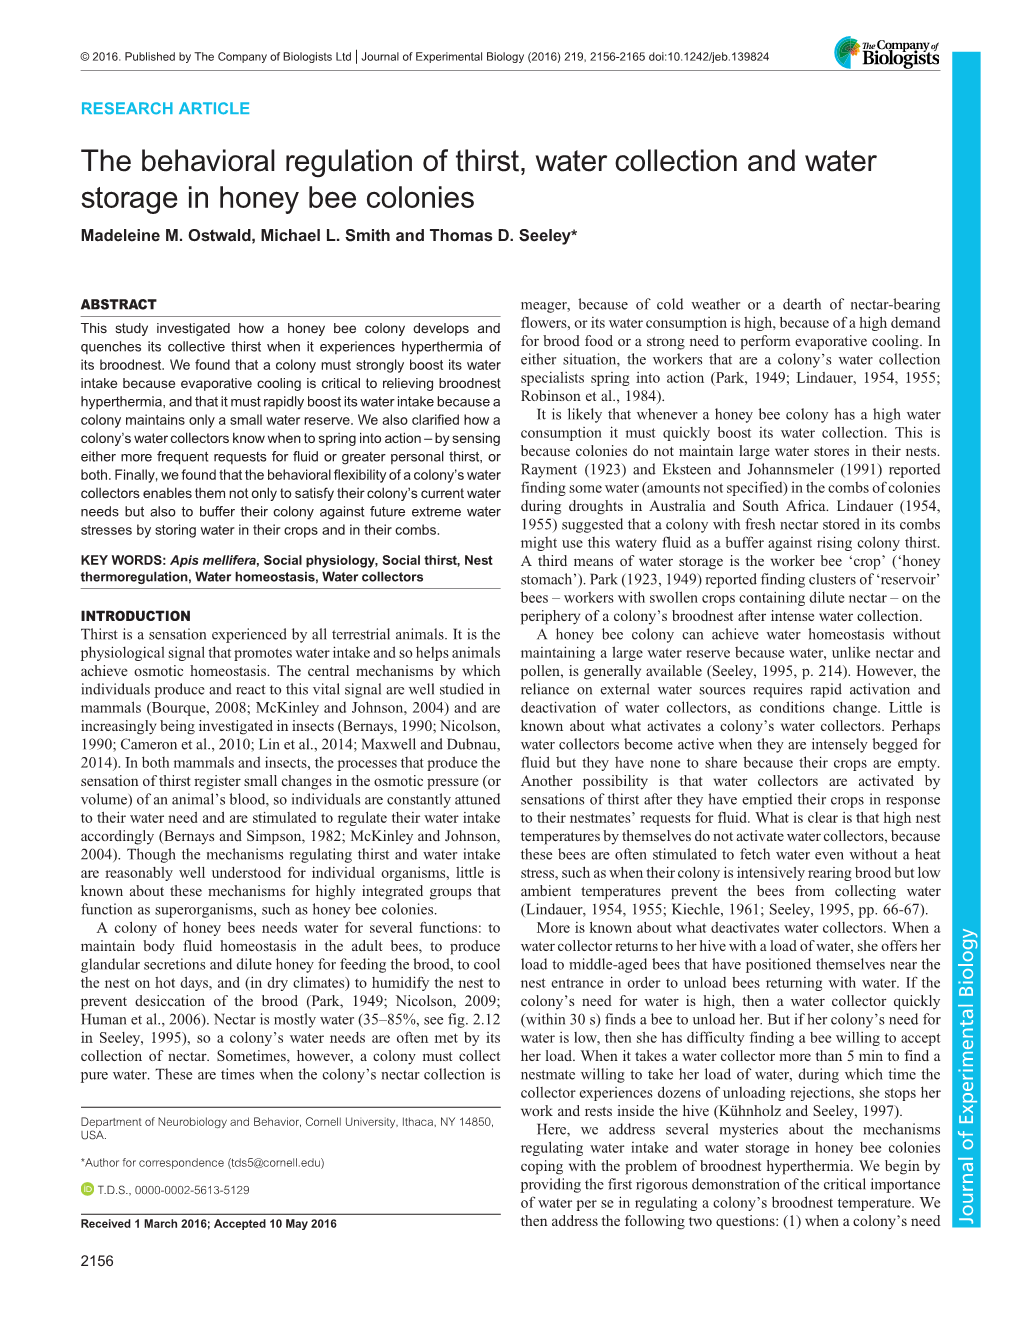 The Behavioral Regulation of Thirst, Water Collection and Water Storage in Honey Bee Colonies Madeleine M